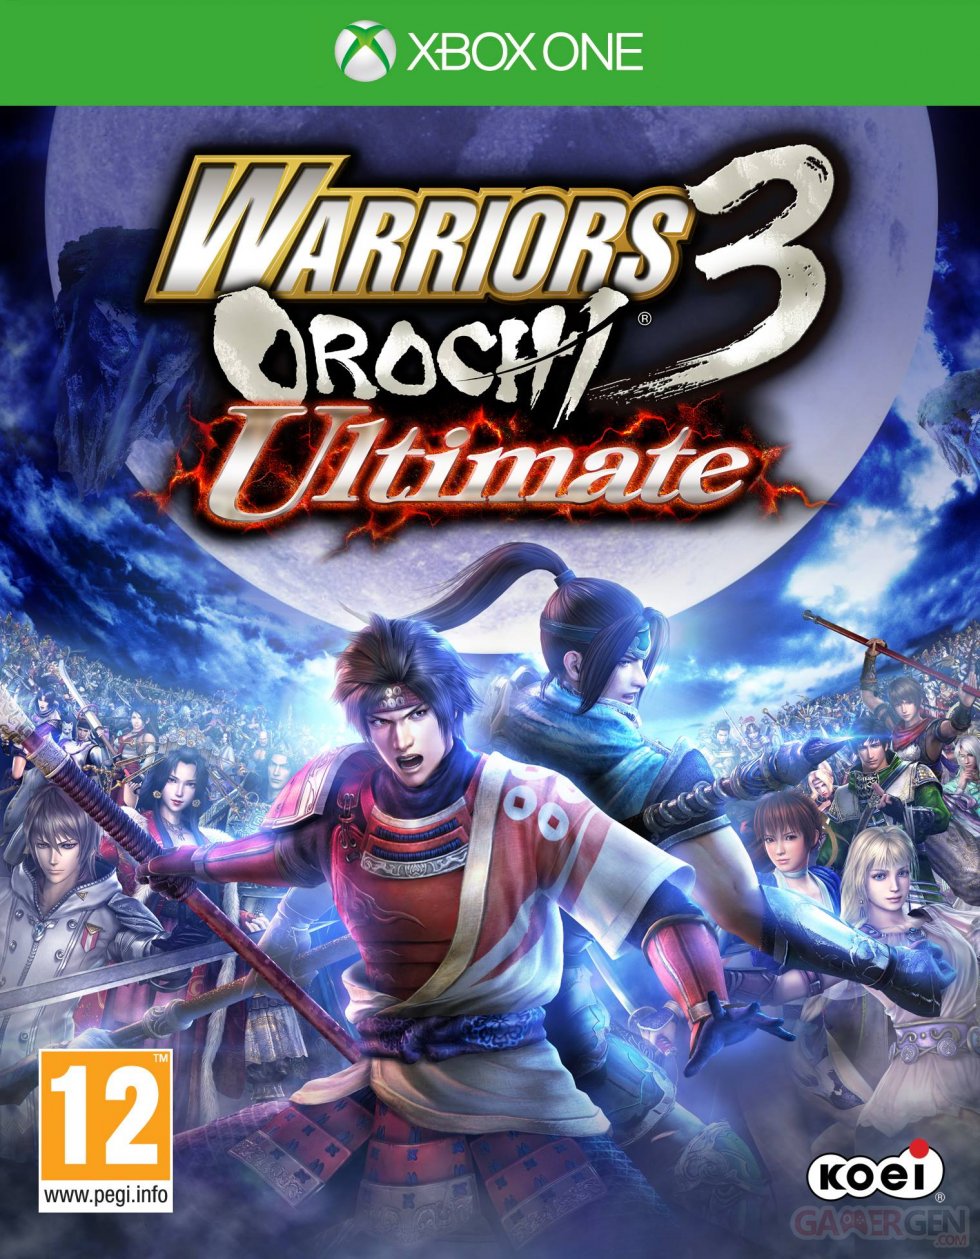 Warriors Orochi 3 Ultimate jaquettes couvertures europe 29.05.2014  (1)